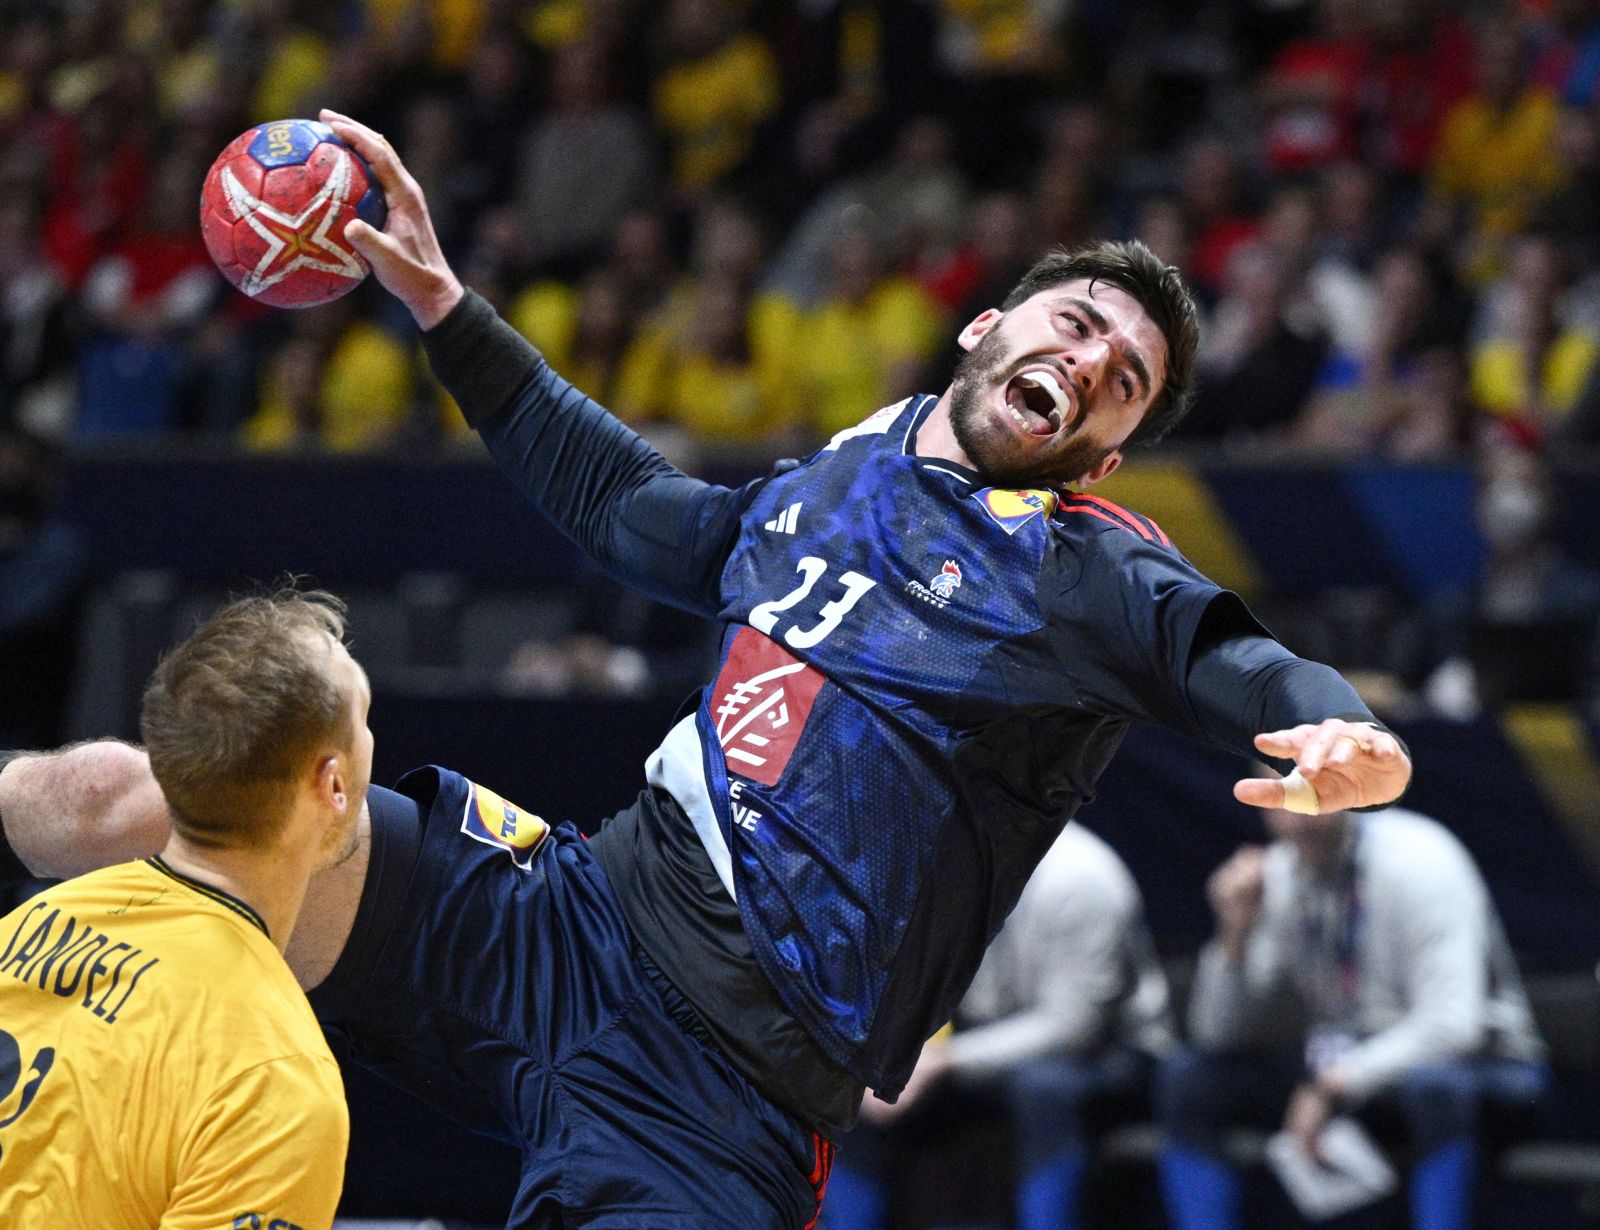 epa10434808 France's Ludovic Fabregas and Sweden's Lukas Sandell (L) during the IHF Men's World Championship handball semi final match between France and Denmark, in Stockholm, Sweden, 27 January 2023.  EPA/Anders Wiklund  SWEDEN OUT